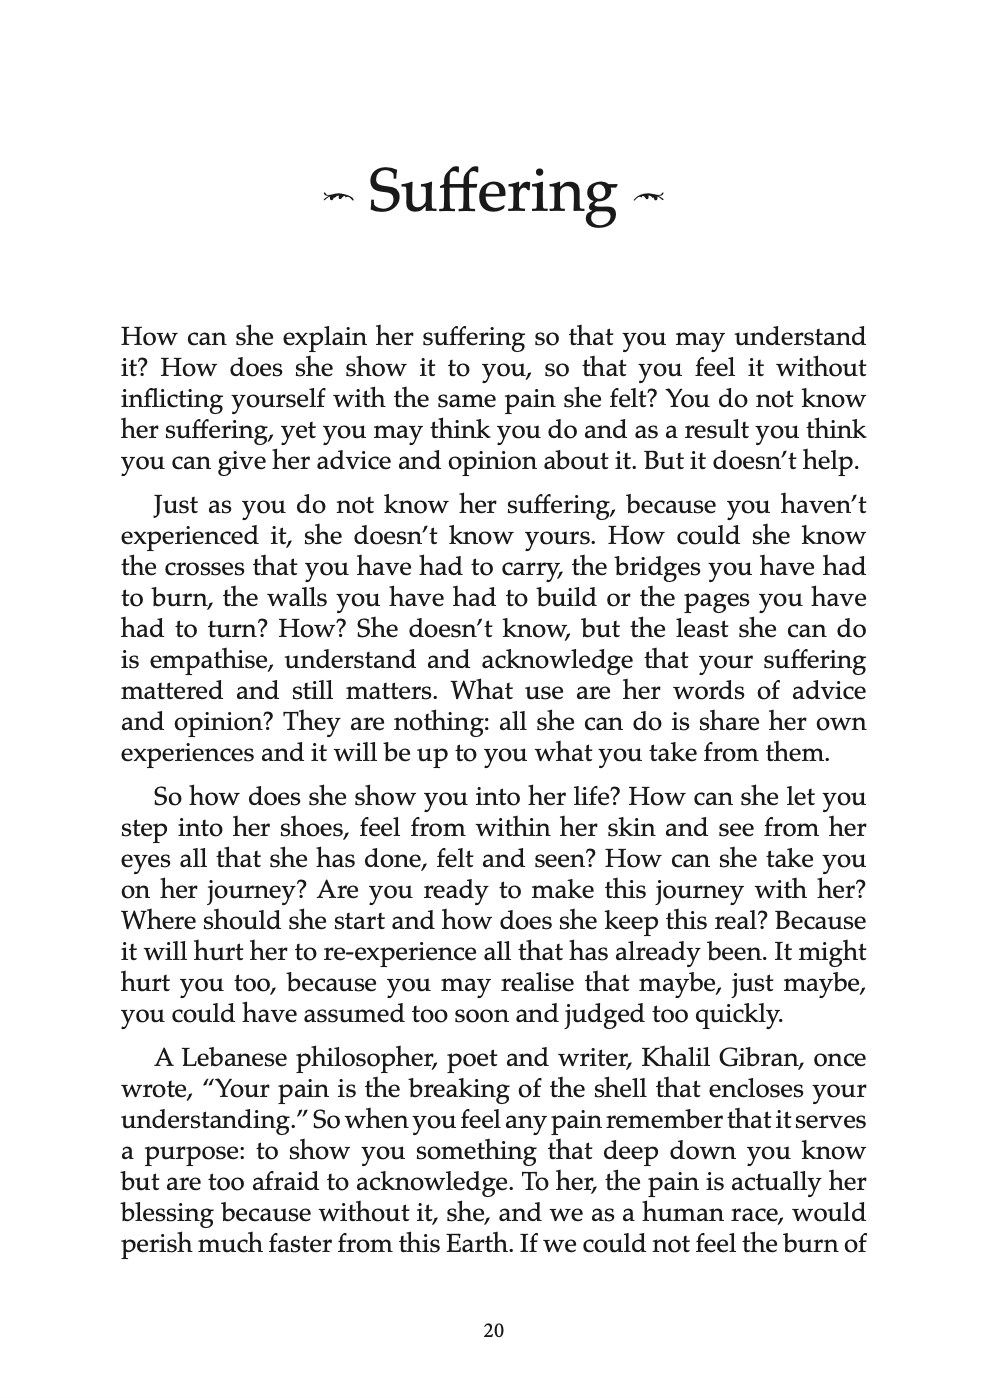 Chapter sample from the book "Unmasking Depression". Chapter title is: "Suffering".